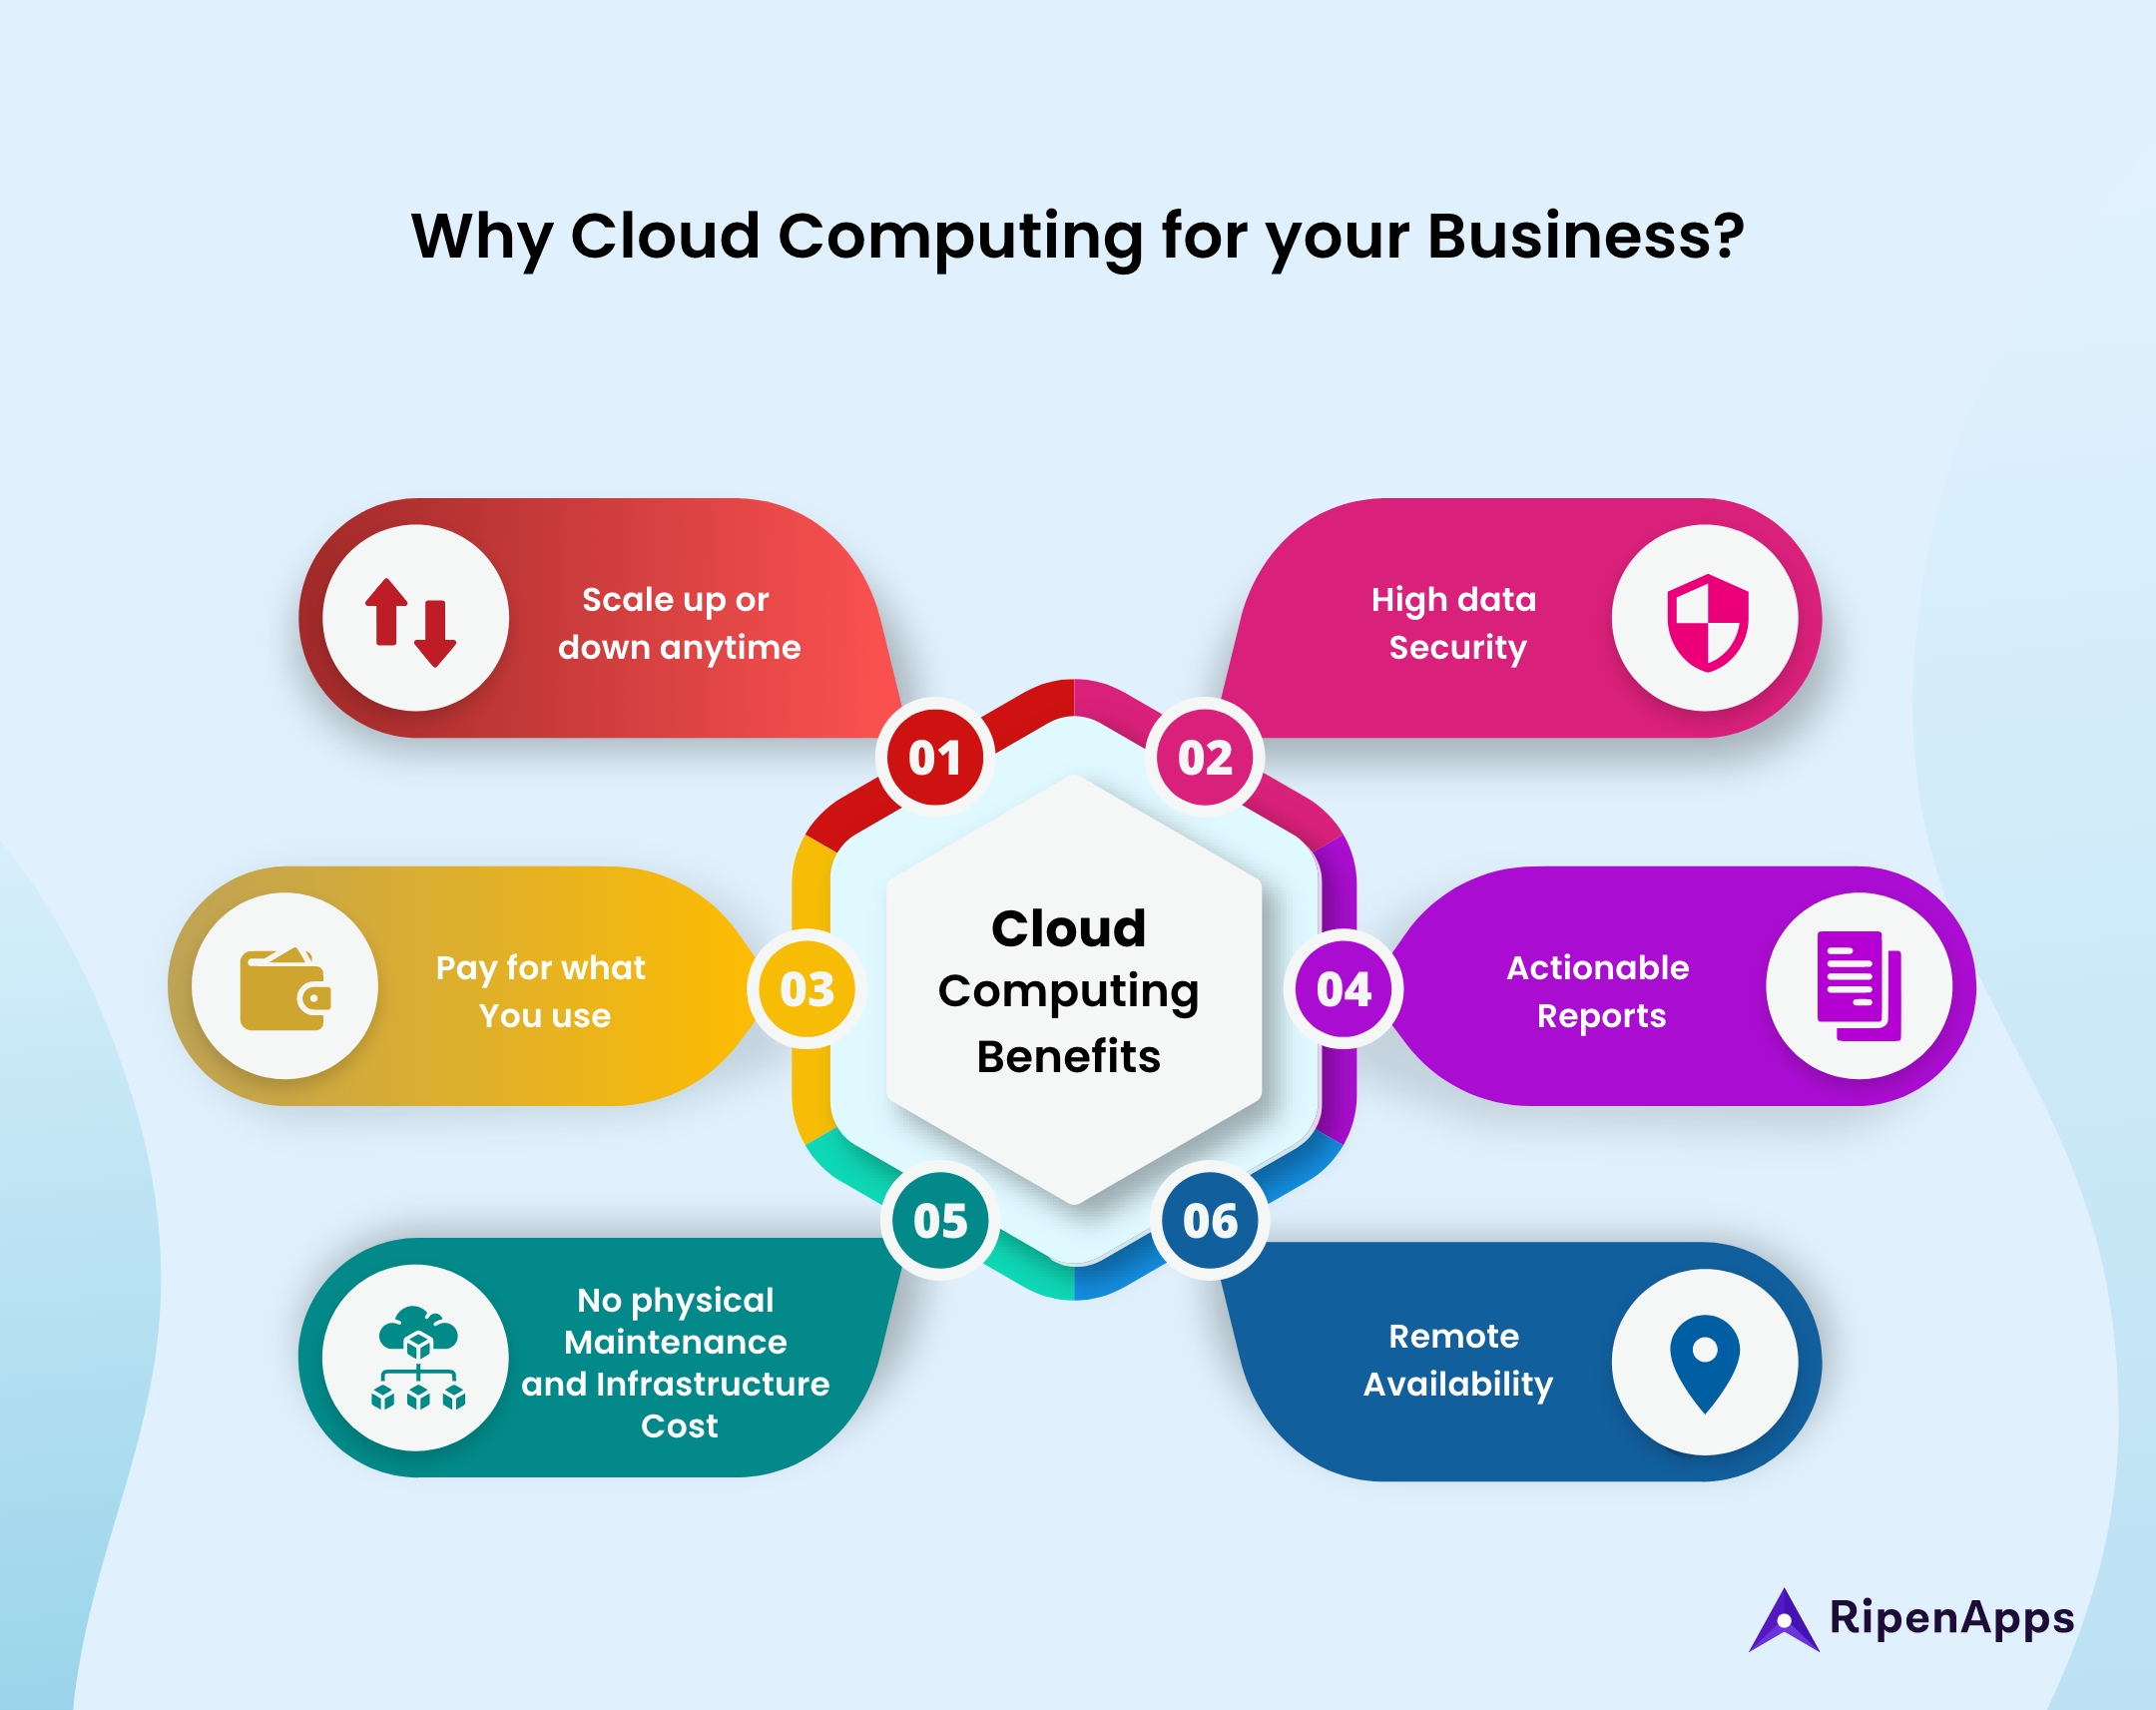 Why Cloud Computing for your Business.jpg